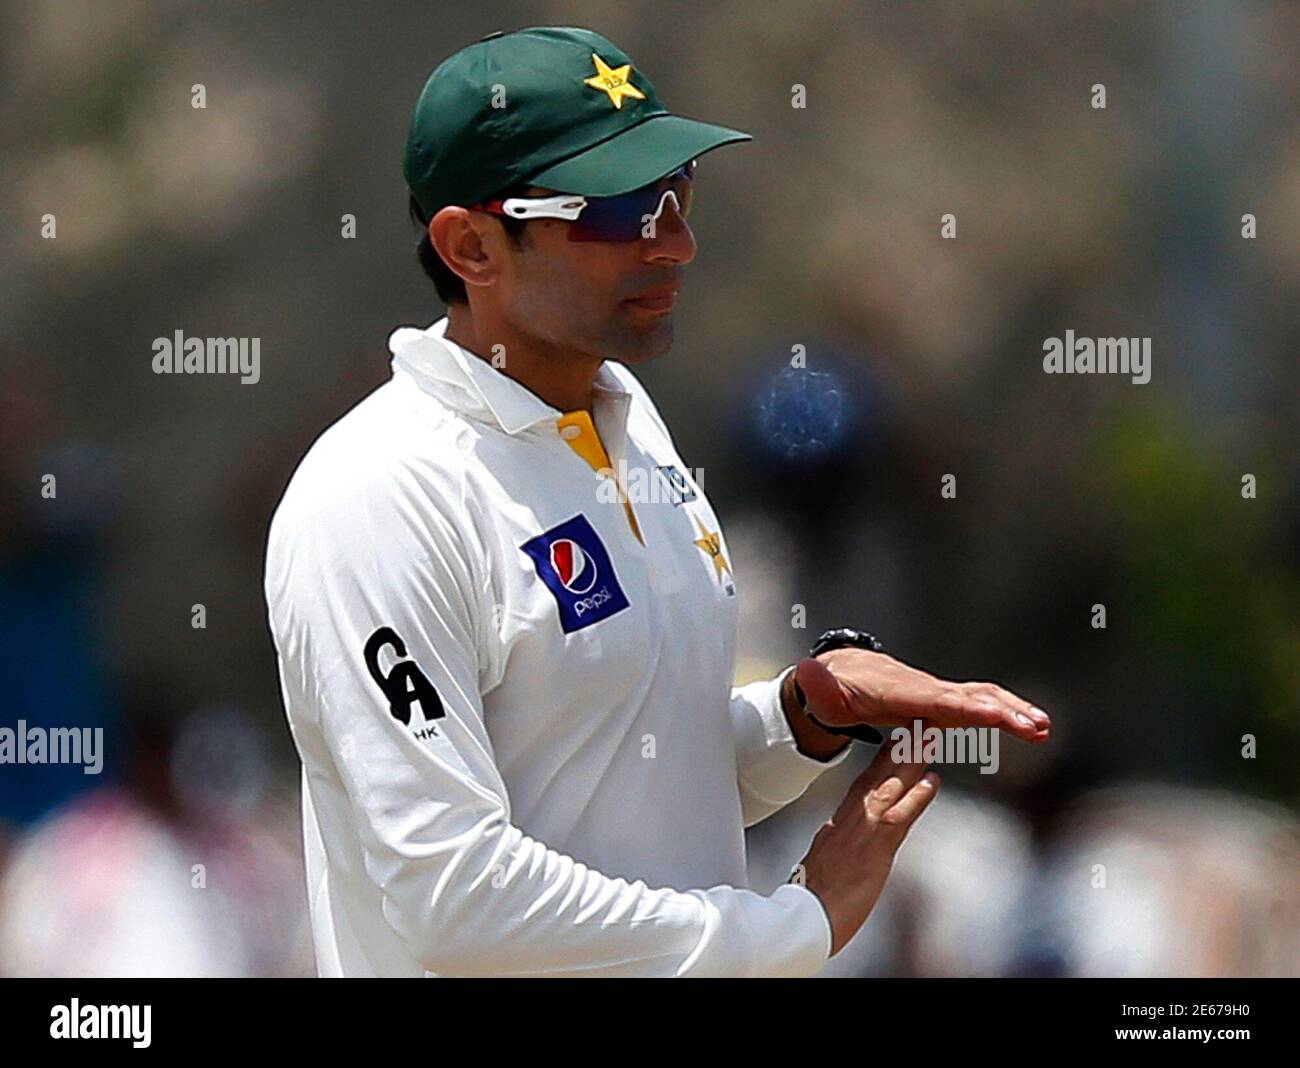 Pakistan's captain Misbah-ul-Haq signals the third umpire's decision for the unsuccessful wicket of Sri Lanka's Mahela Jayawardene (not pictured) during the third day of their first test cricket match in Galle August 8, 2014. REUTERS/Dinuka Liyanawatte (SRI LANKA - Tags: SPORT CRICKET) Stock Photo